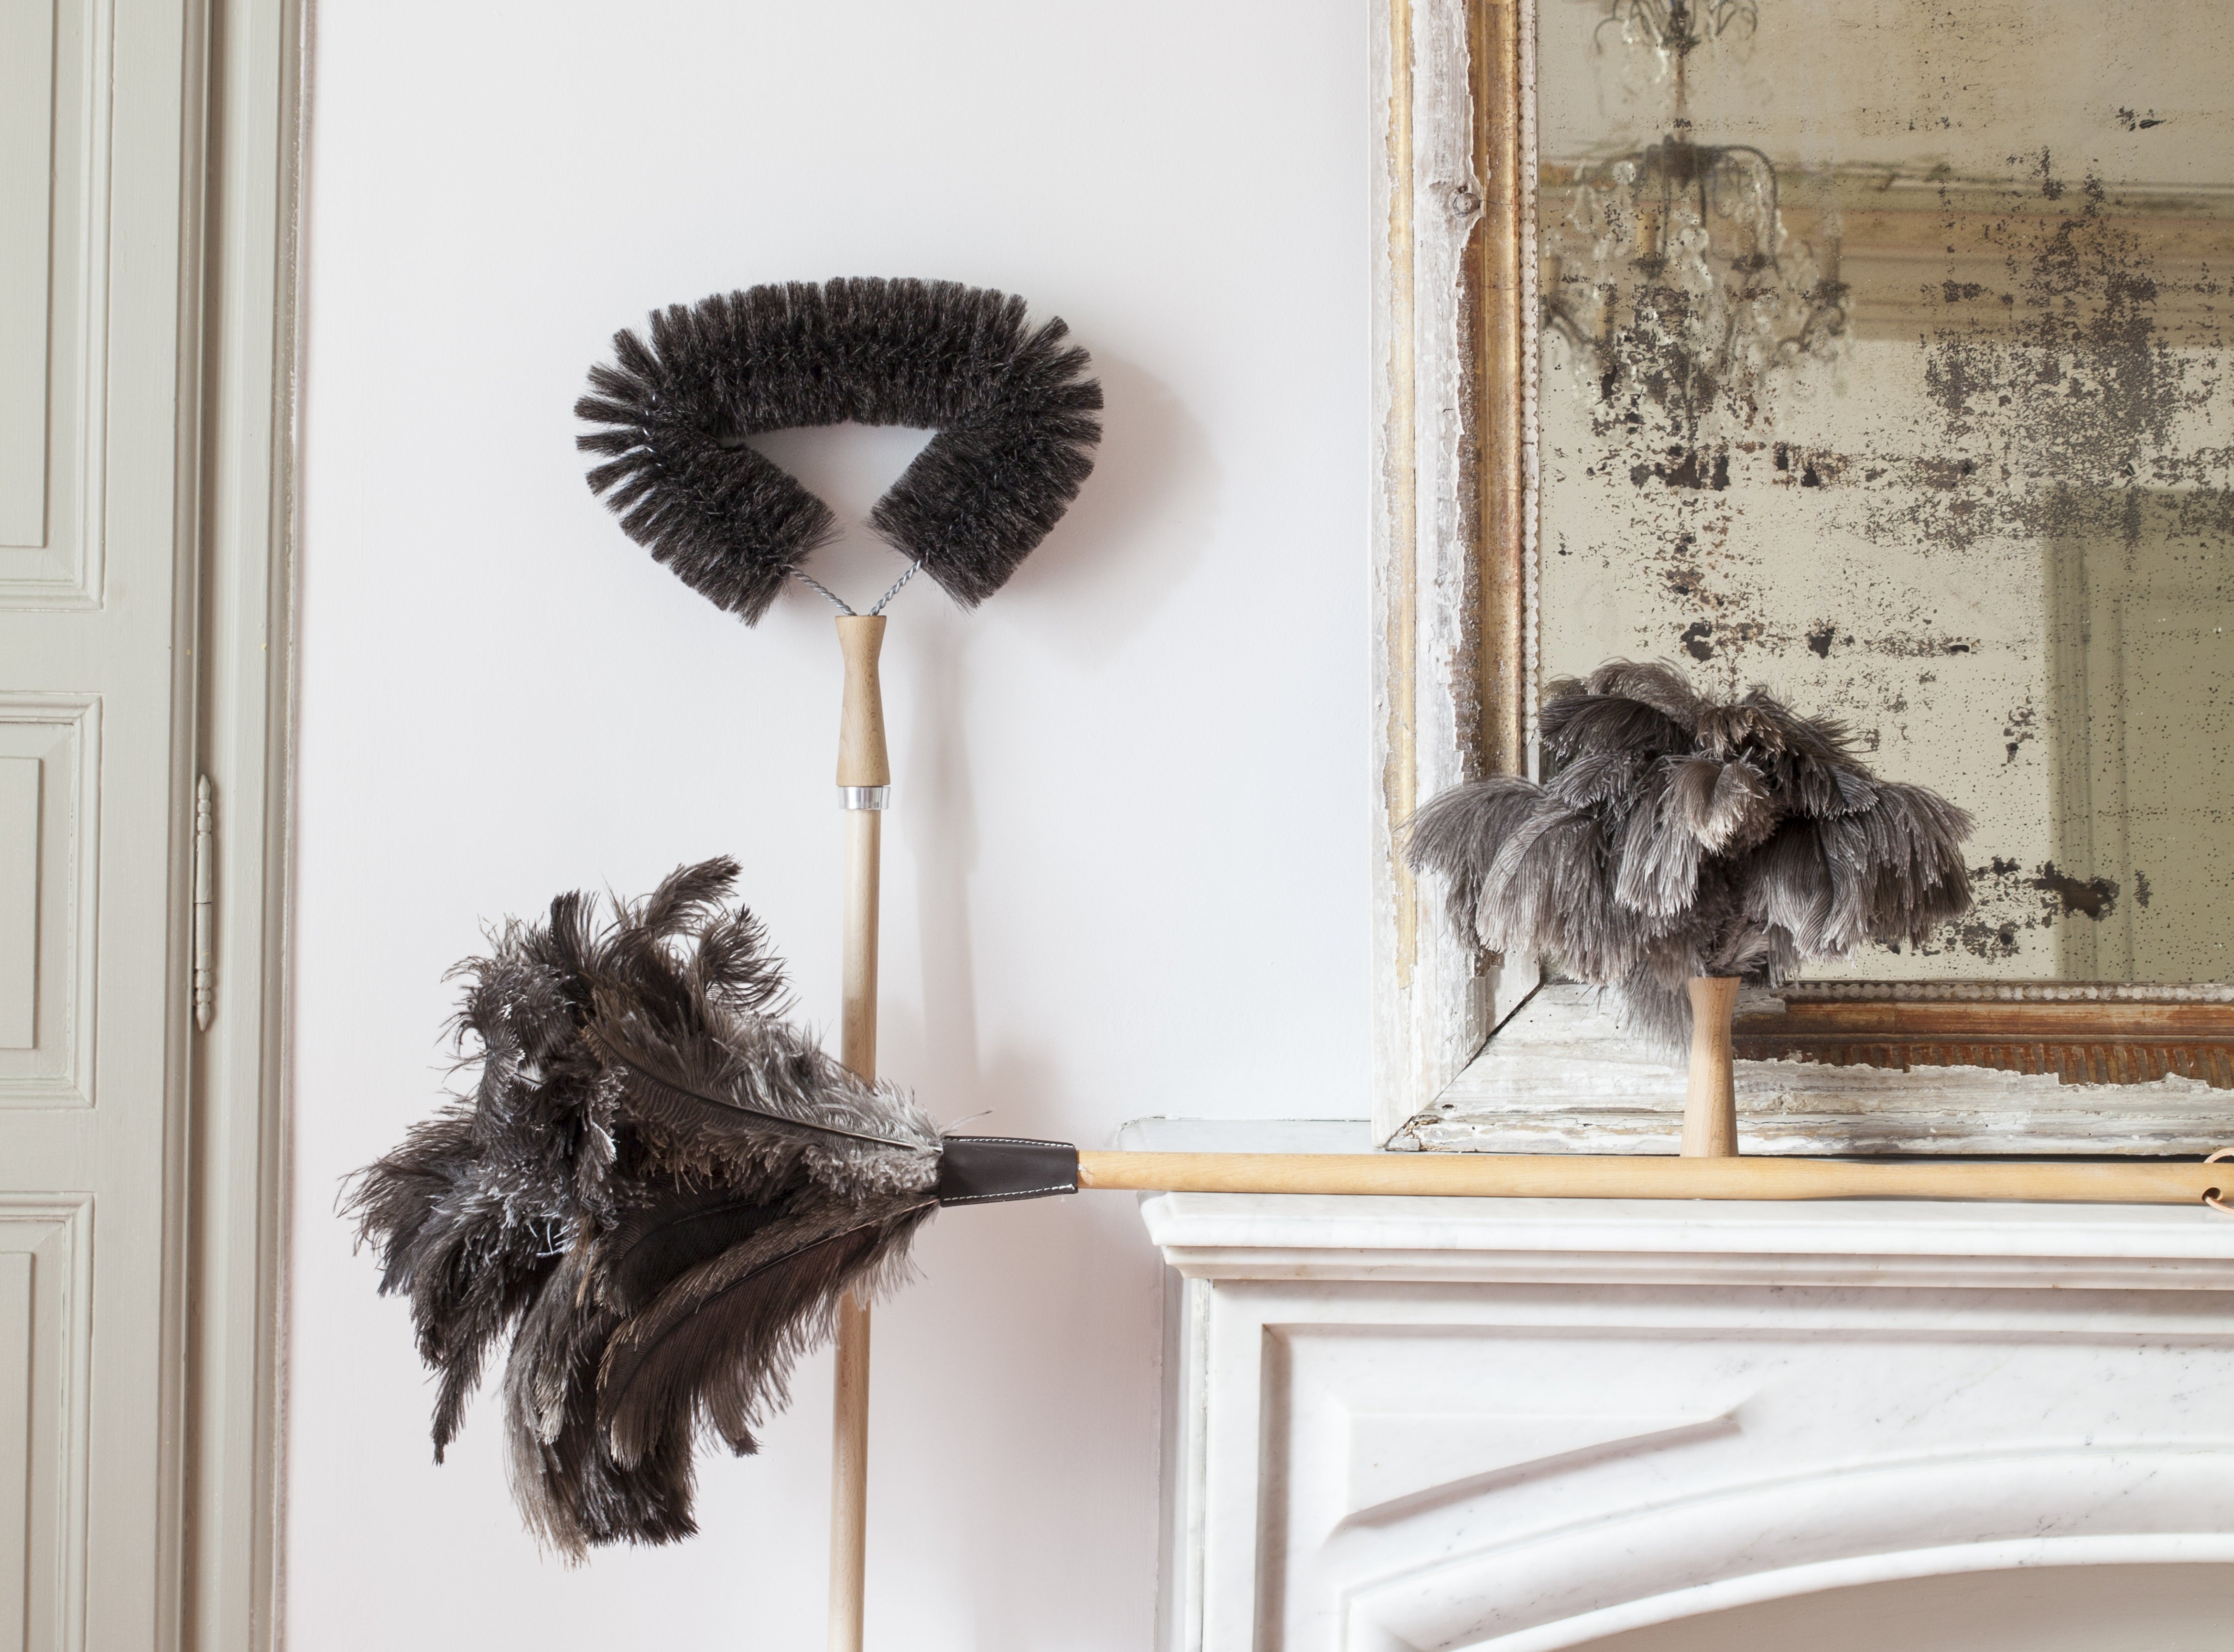 Andrée Jardin Tradition Small Duster Head Dusters Andrée Jardin Brand_Andrée Jardin Home_Household Cleaning Home_Provençal Style petit-plumeau-tradition-s3-1011